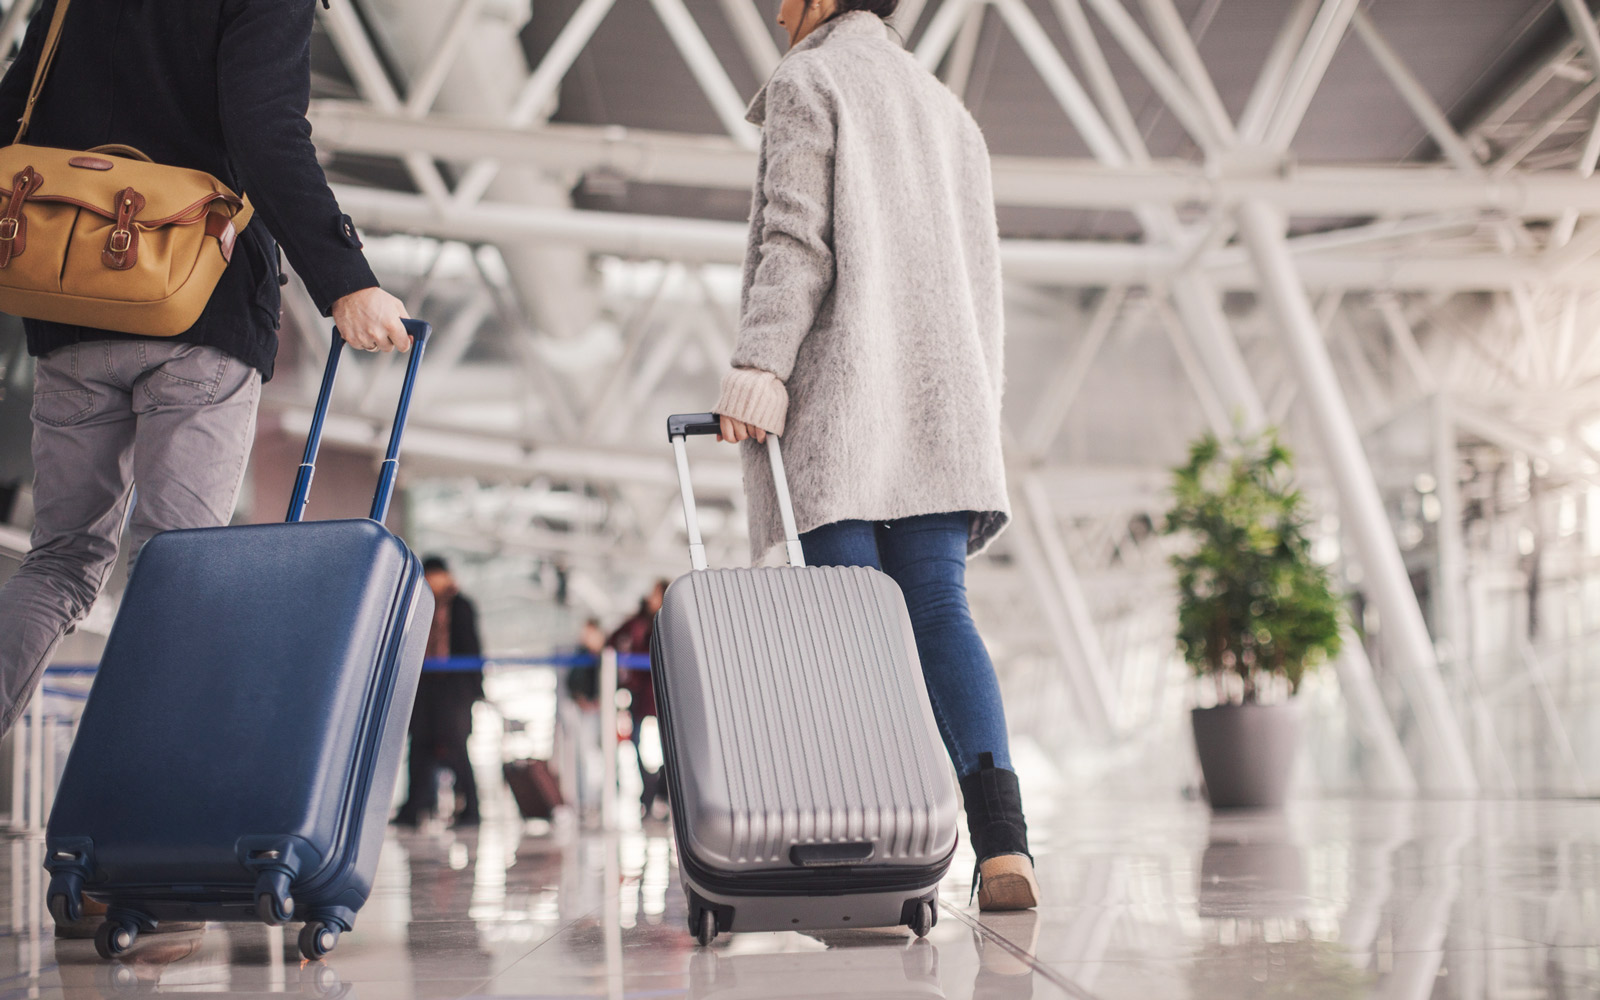 Types of Luggage and Travel Bags: How to Choose a Good One? 